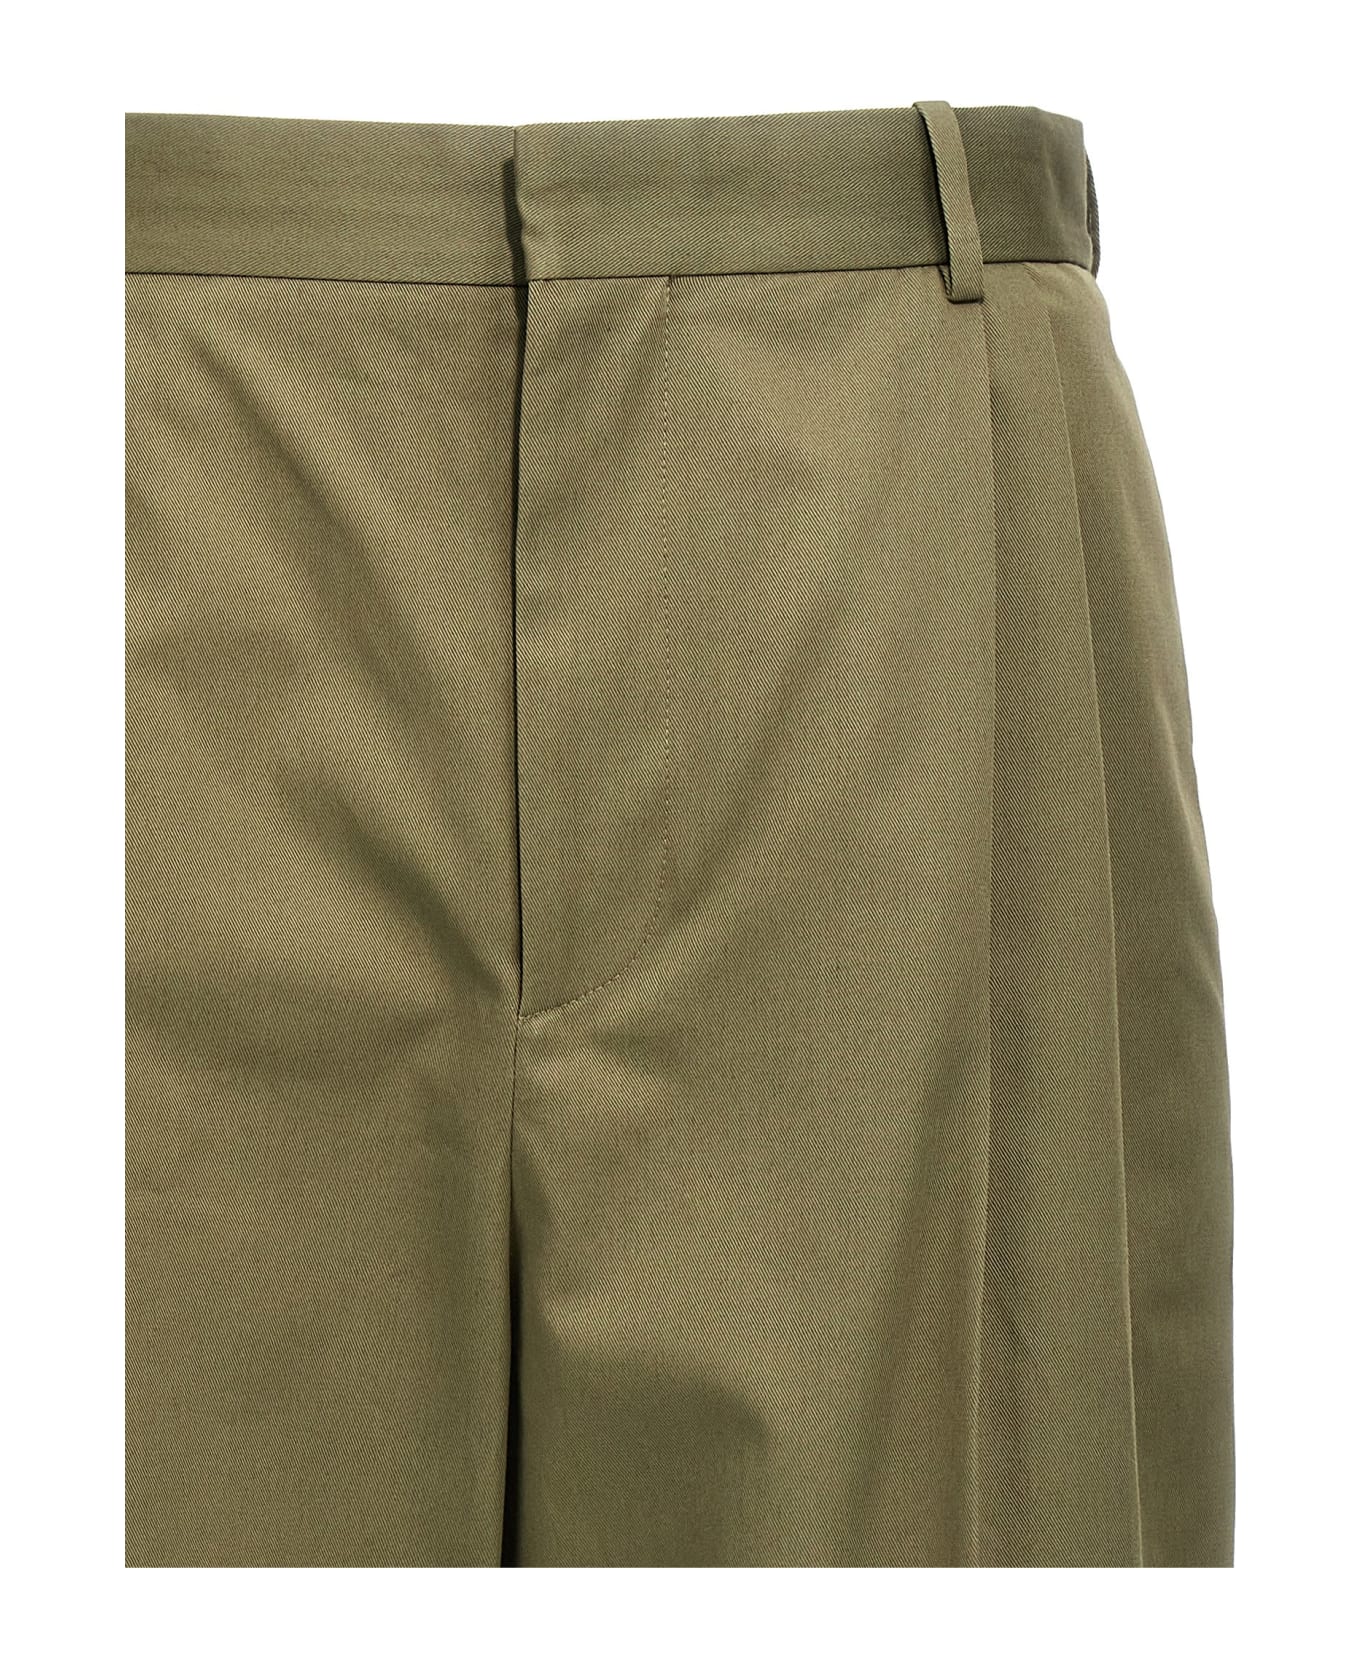 Loewe Central Pleated Trousers - Green ボトムス